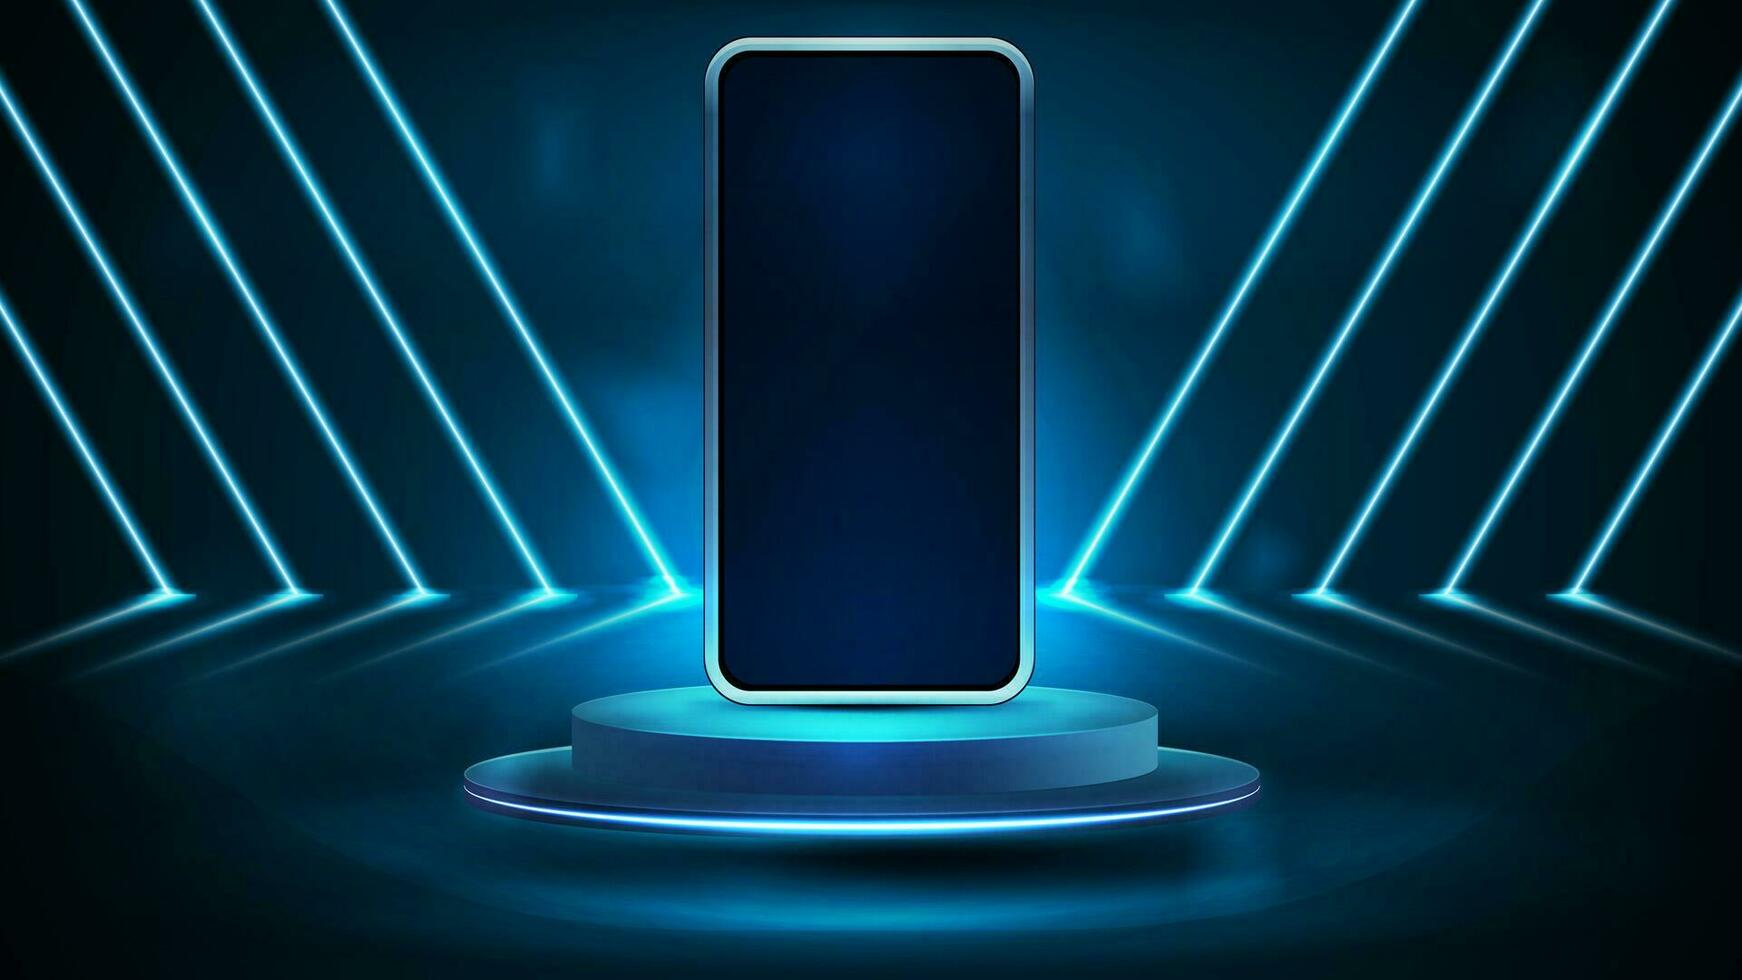 Smartphone on podium in empty blue scene with diagonal blue line neon lamps on background. Smartphone mockup with neon elements vector